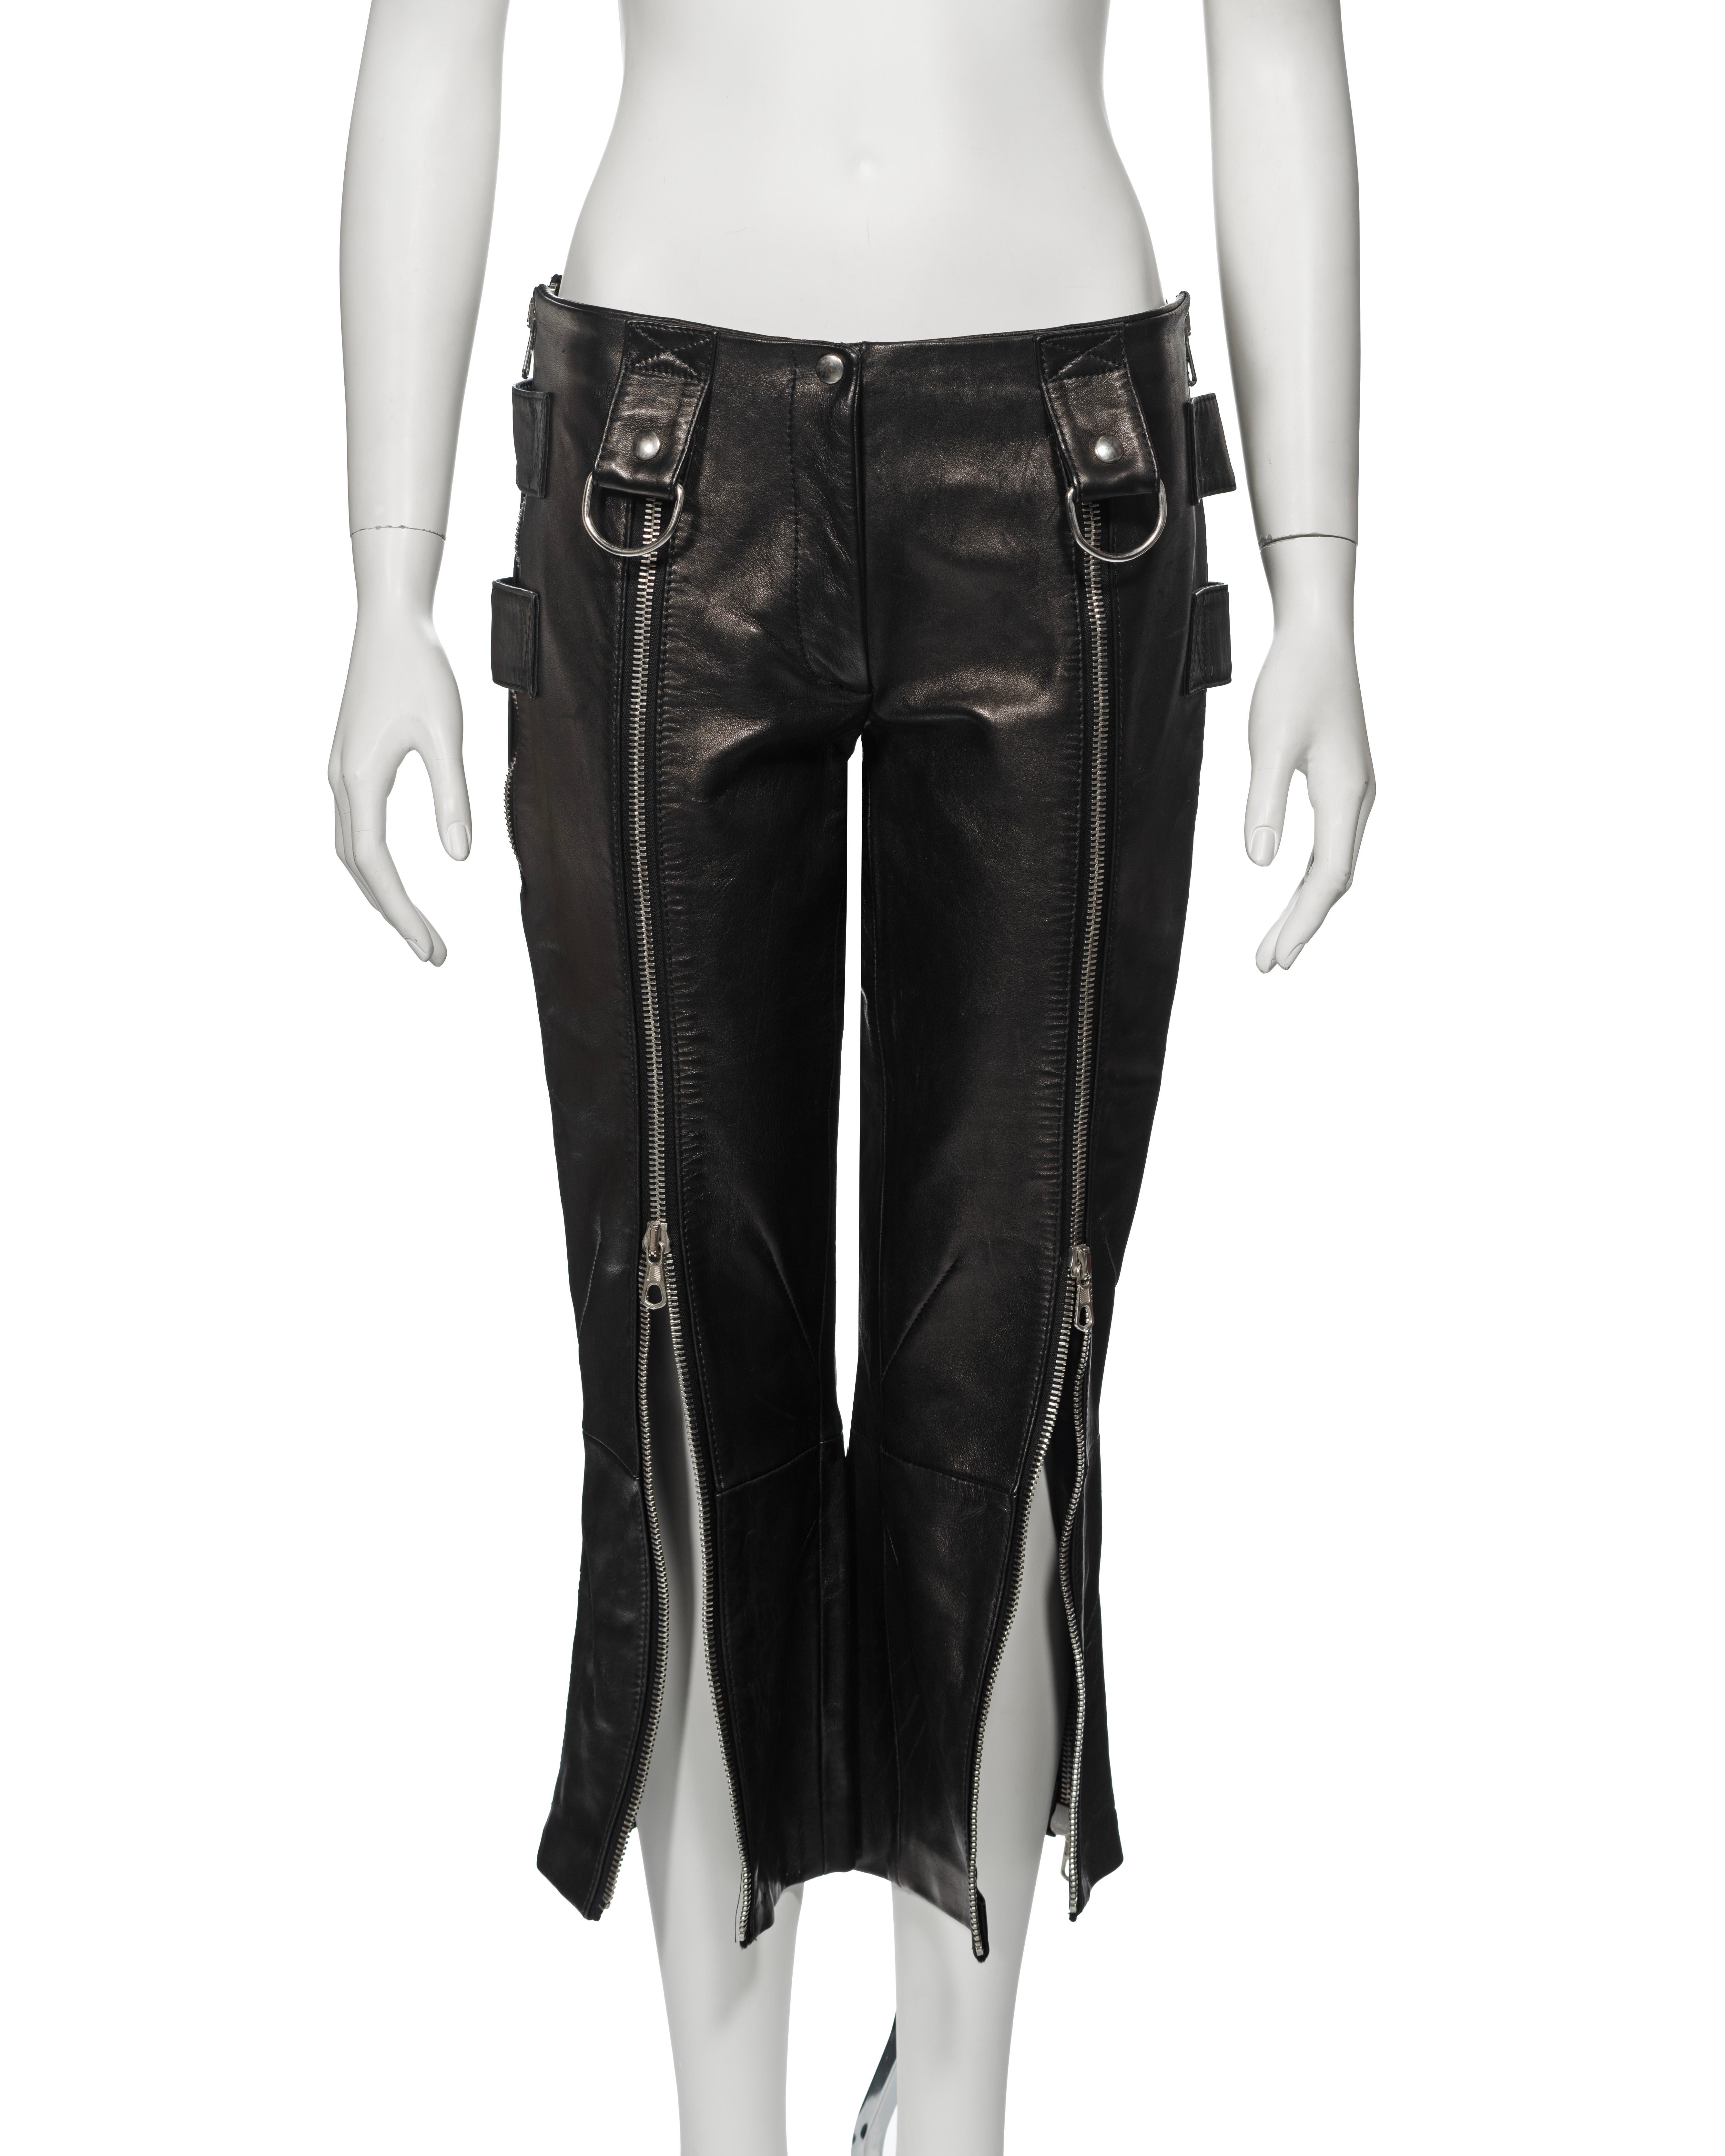 ▪ Dolce & Gabbana Black Leather Capri Pants
▪ Spring-Summer 2000
▪ Sold by One of a Kind Archive
▪ The centre-front of each leg features two metal zips allowing for multiple styling options
▪ Belt loops are adorned with large D-rings
▪ Metal zip